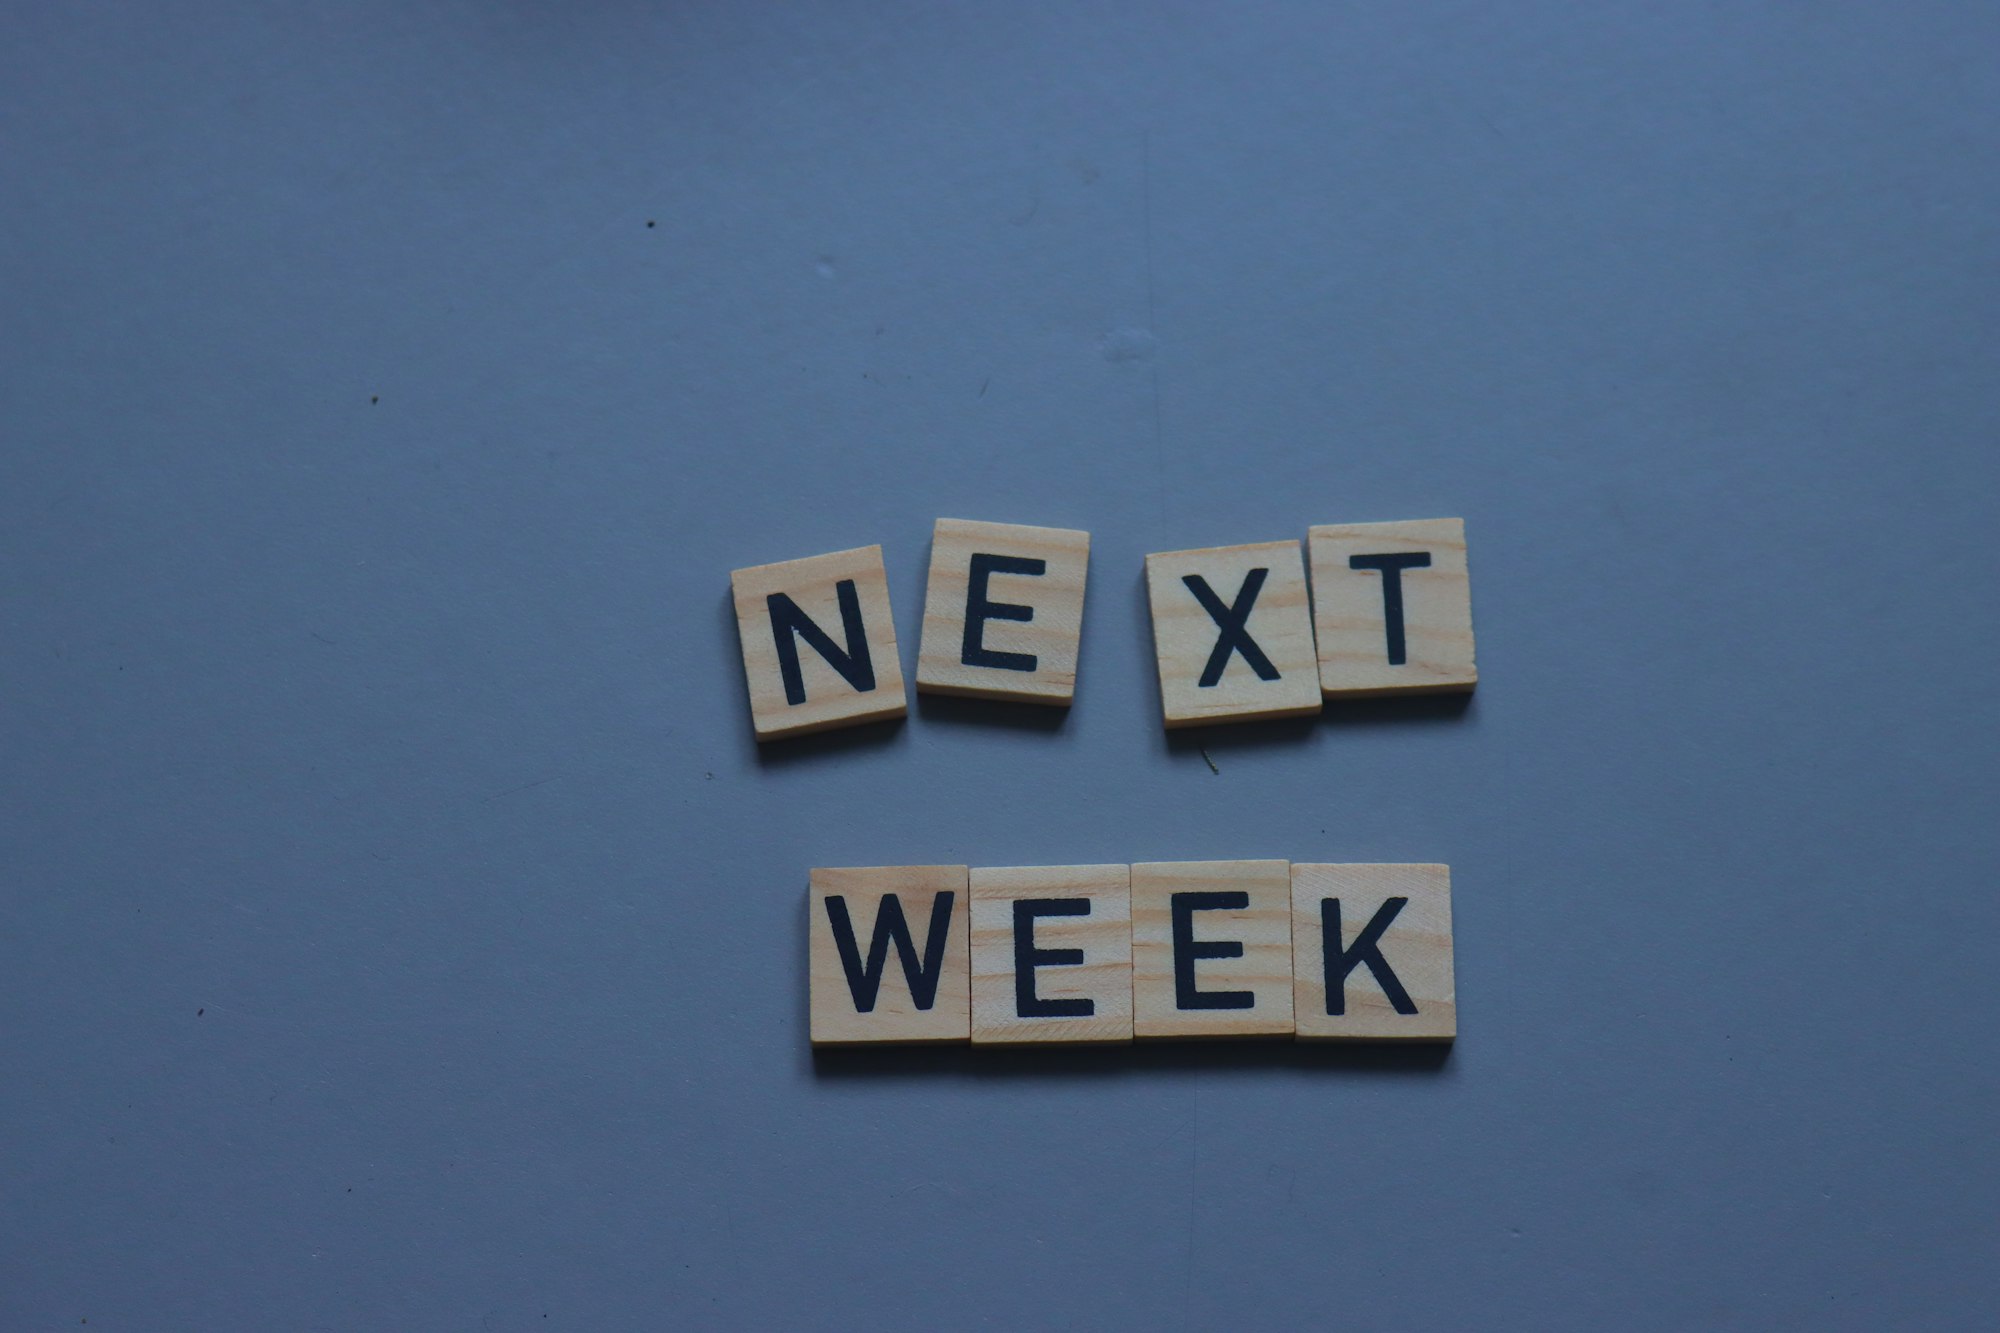 scrabble tiles spelling the word next week on a blue background